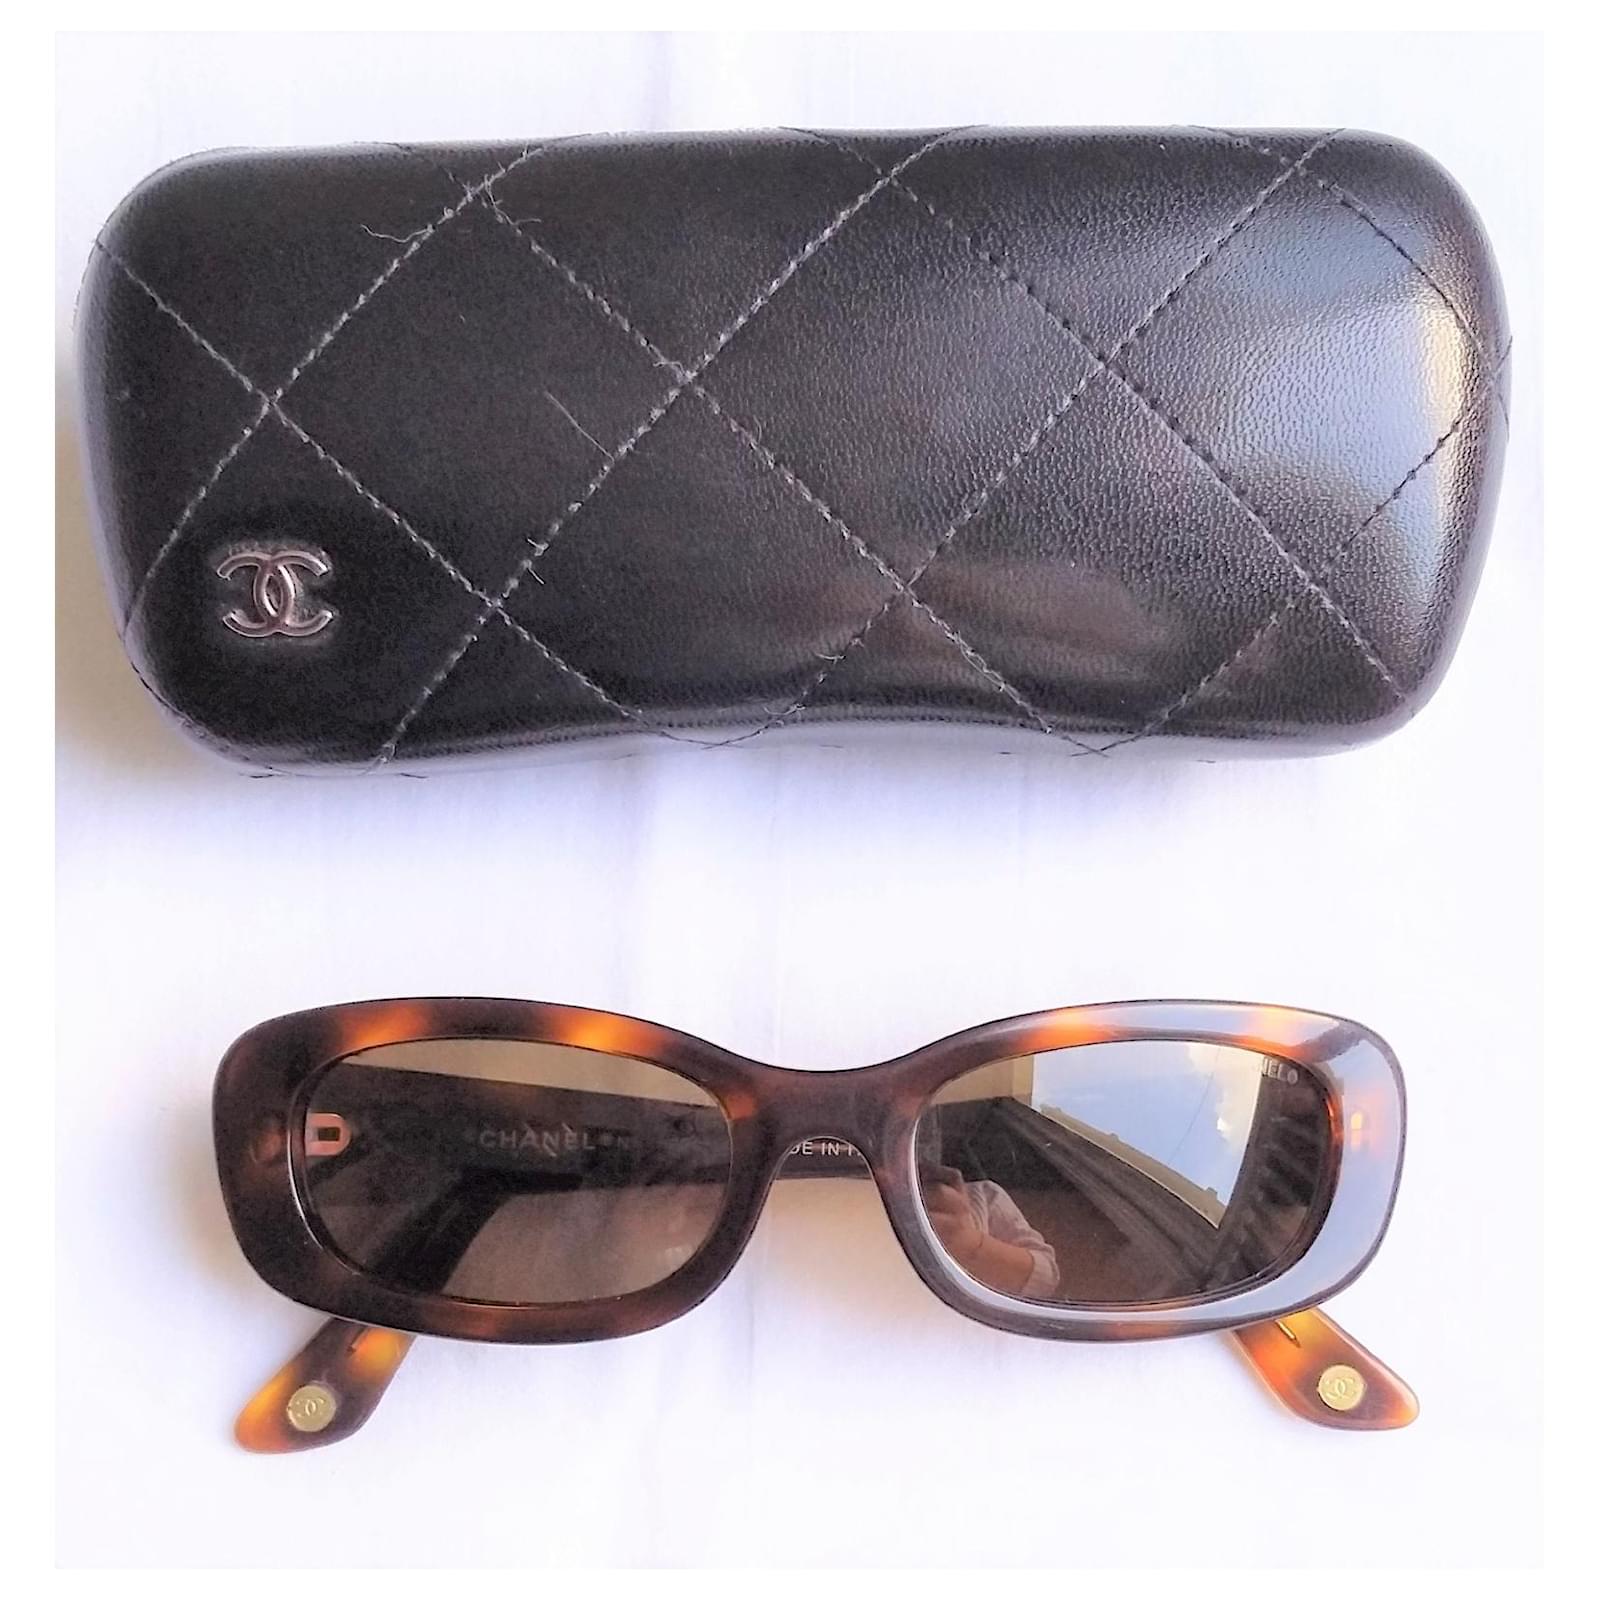 Authentic Second Hand Chanel Tortoiseshell Rhinestone Sunglasses  PSS09700285  THE FIFTH COLLECTION